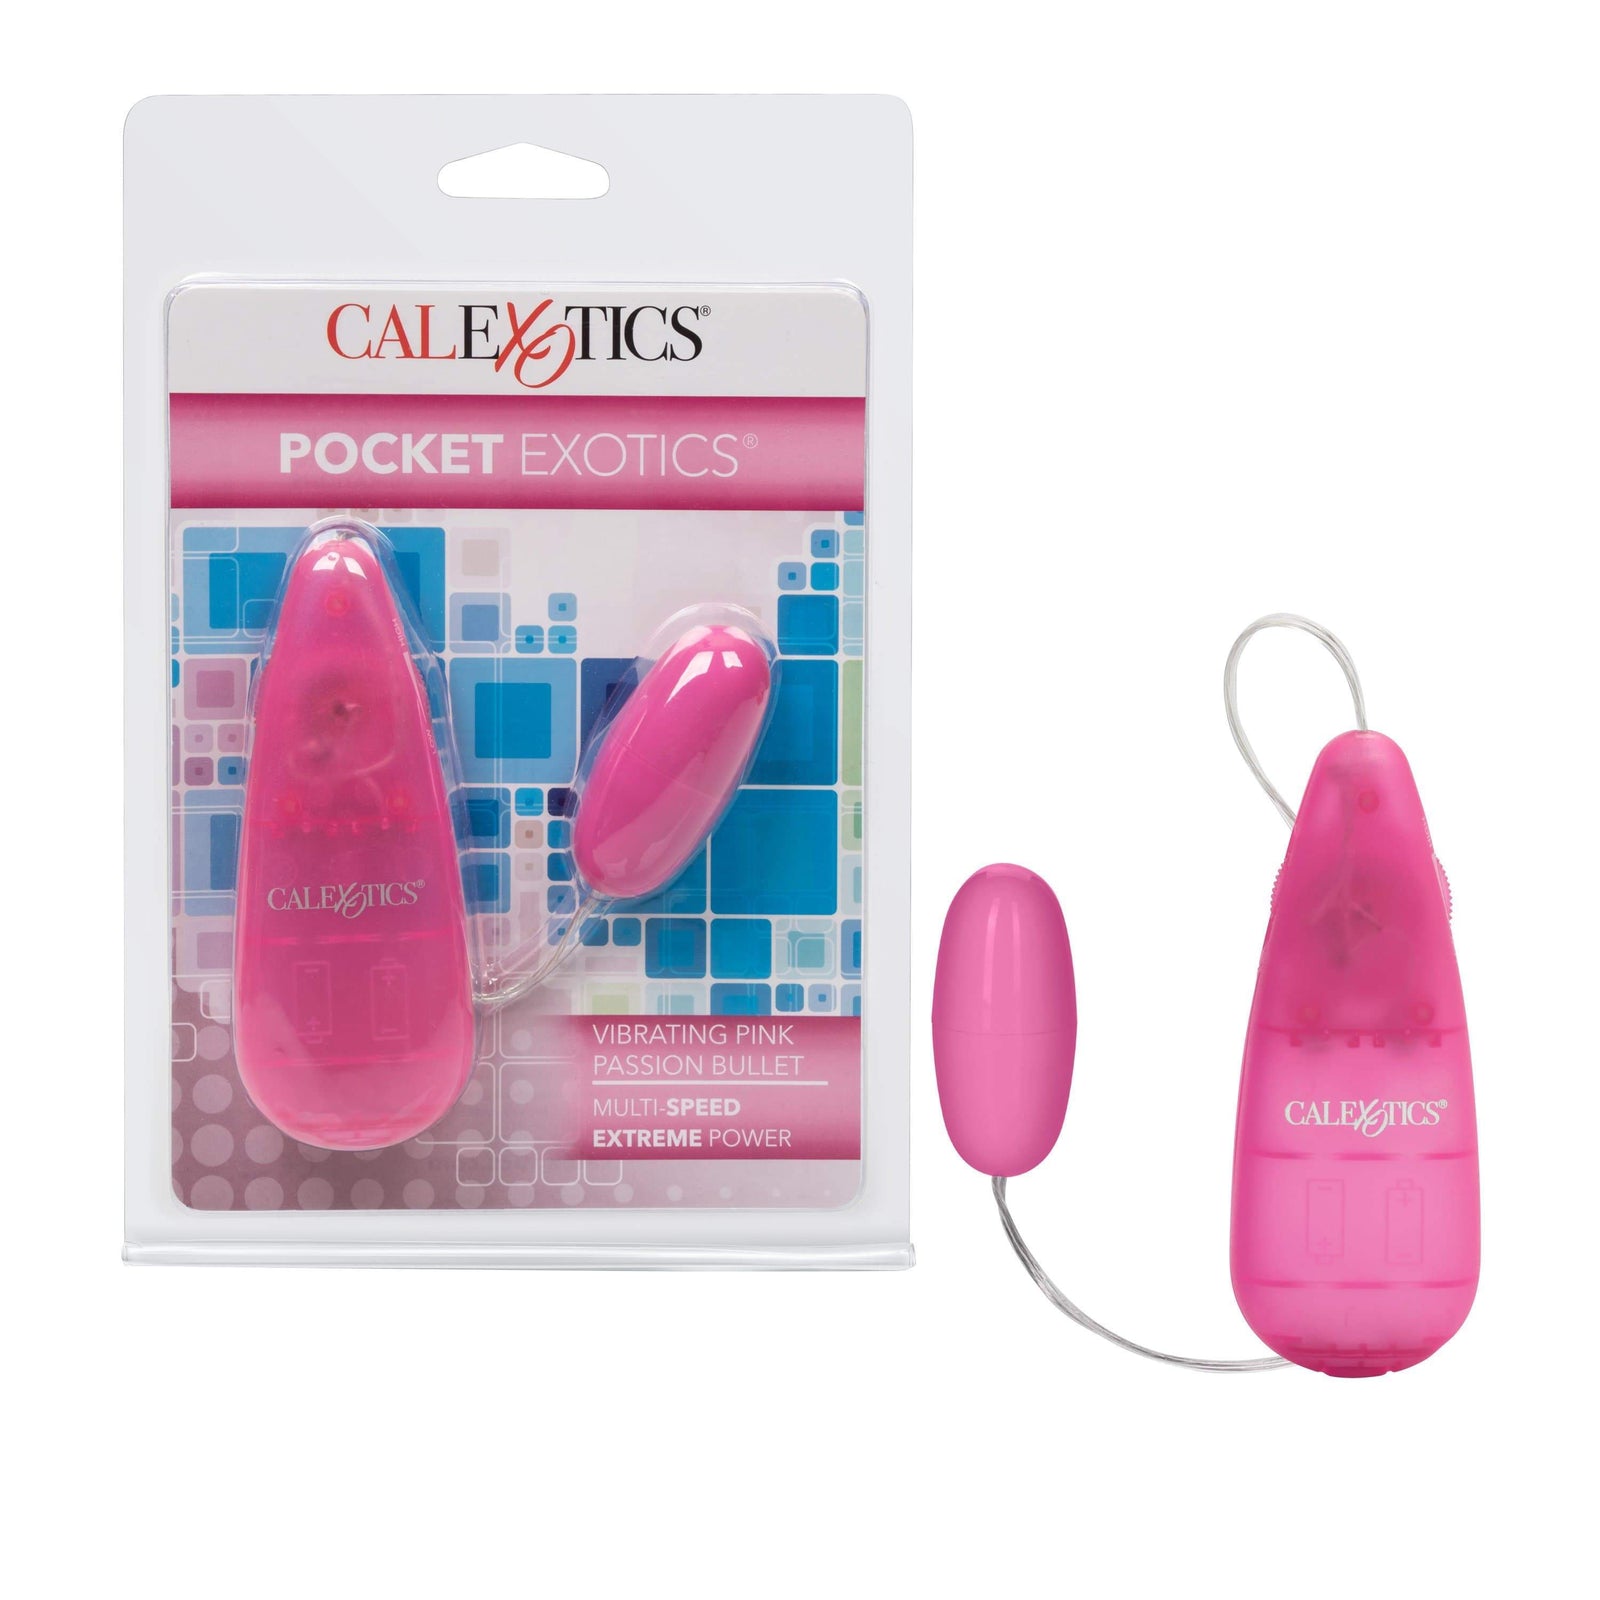 California Exotics - Pocket Exotics Vibrating Pink Passion Bullet Vibrator (Pink) Wired Remote Control Egg (Vibration) Non Rechargeable Durio Asia